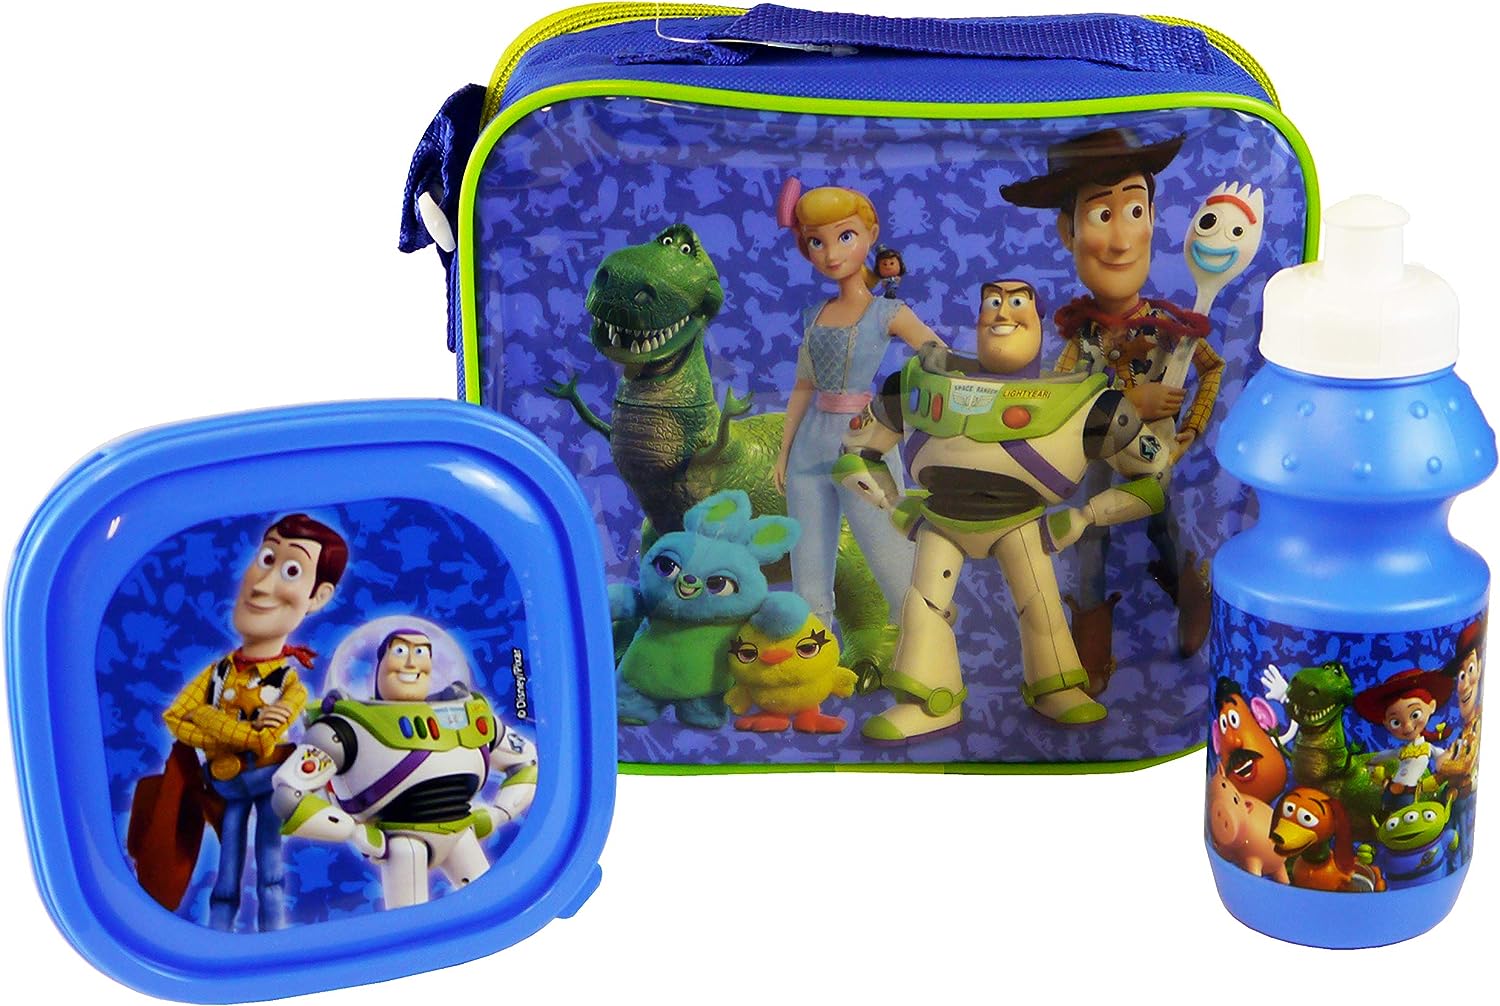 Fast Forward Toy Story Lunch Box for Toddlers Set - Buzz Lightyear Lunch Box, Water Pouch, Stickers, More | Lightyear Lunch Bag